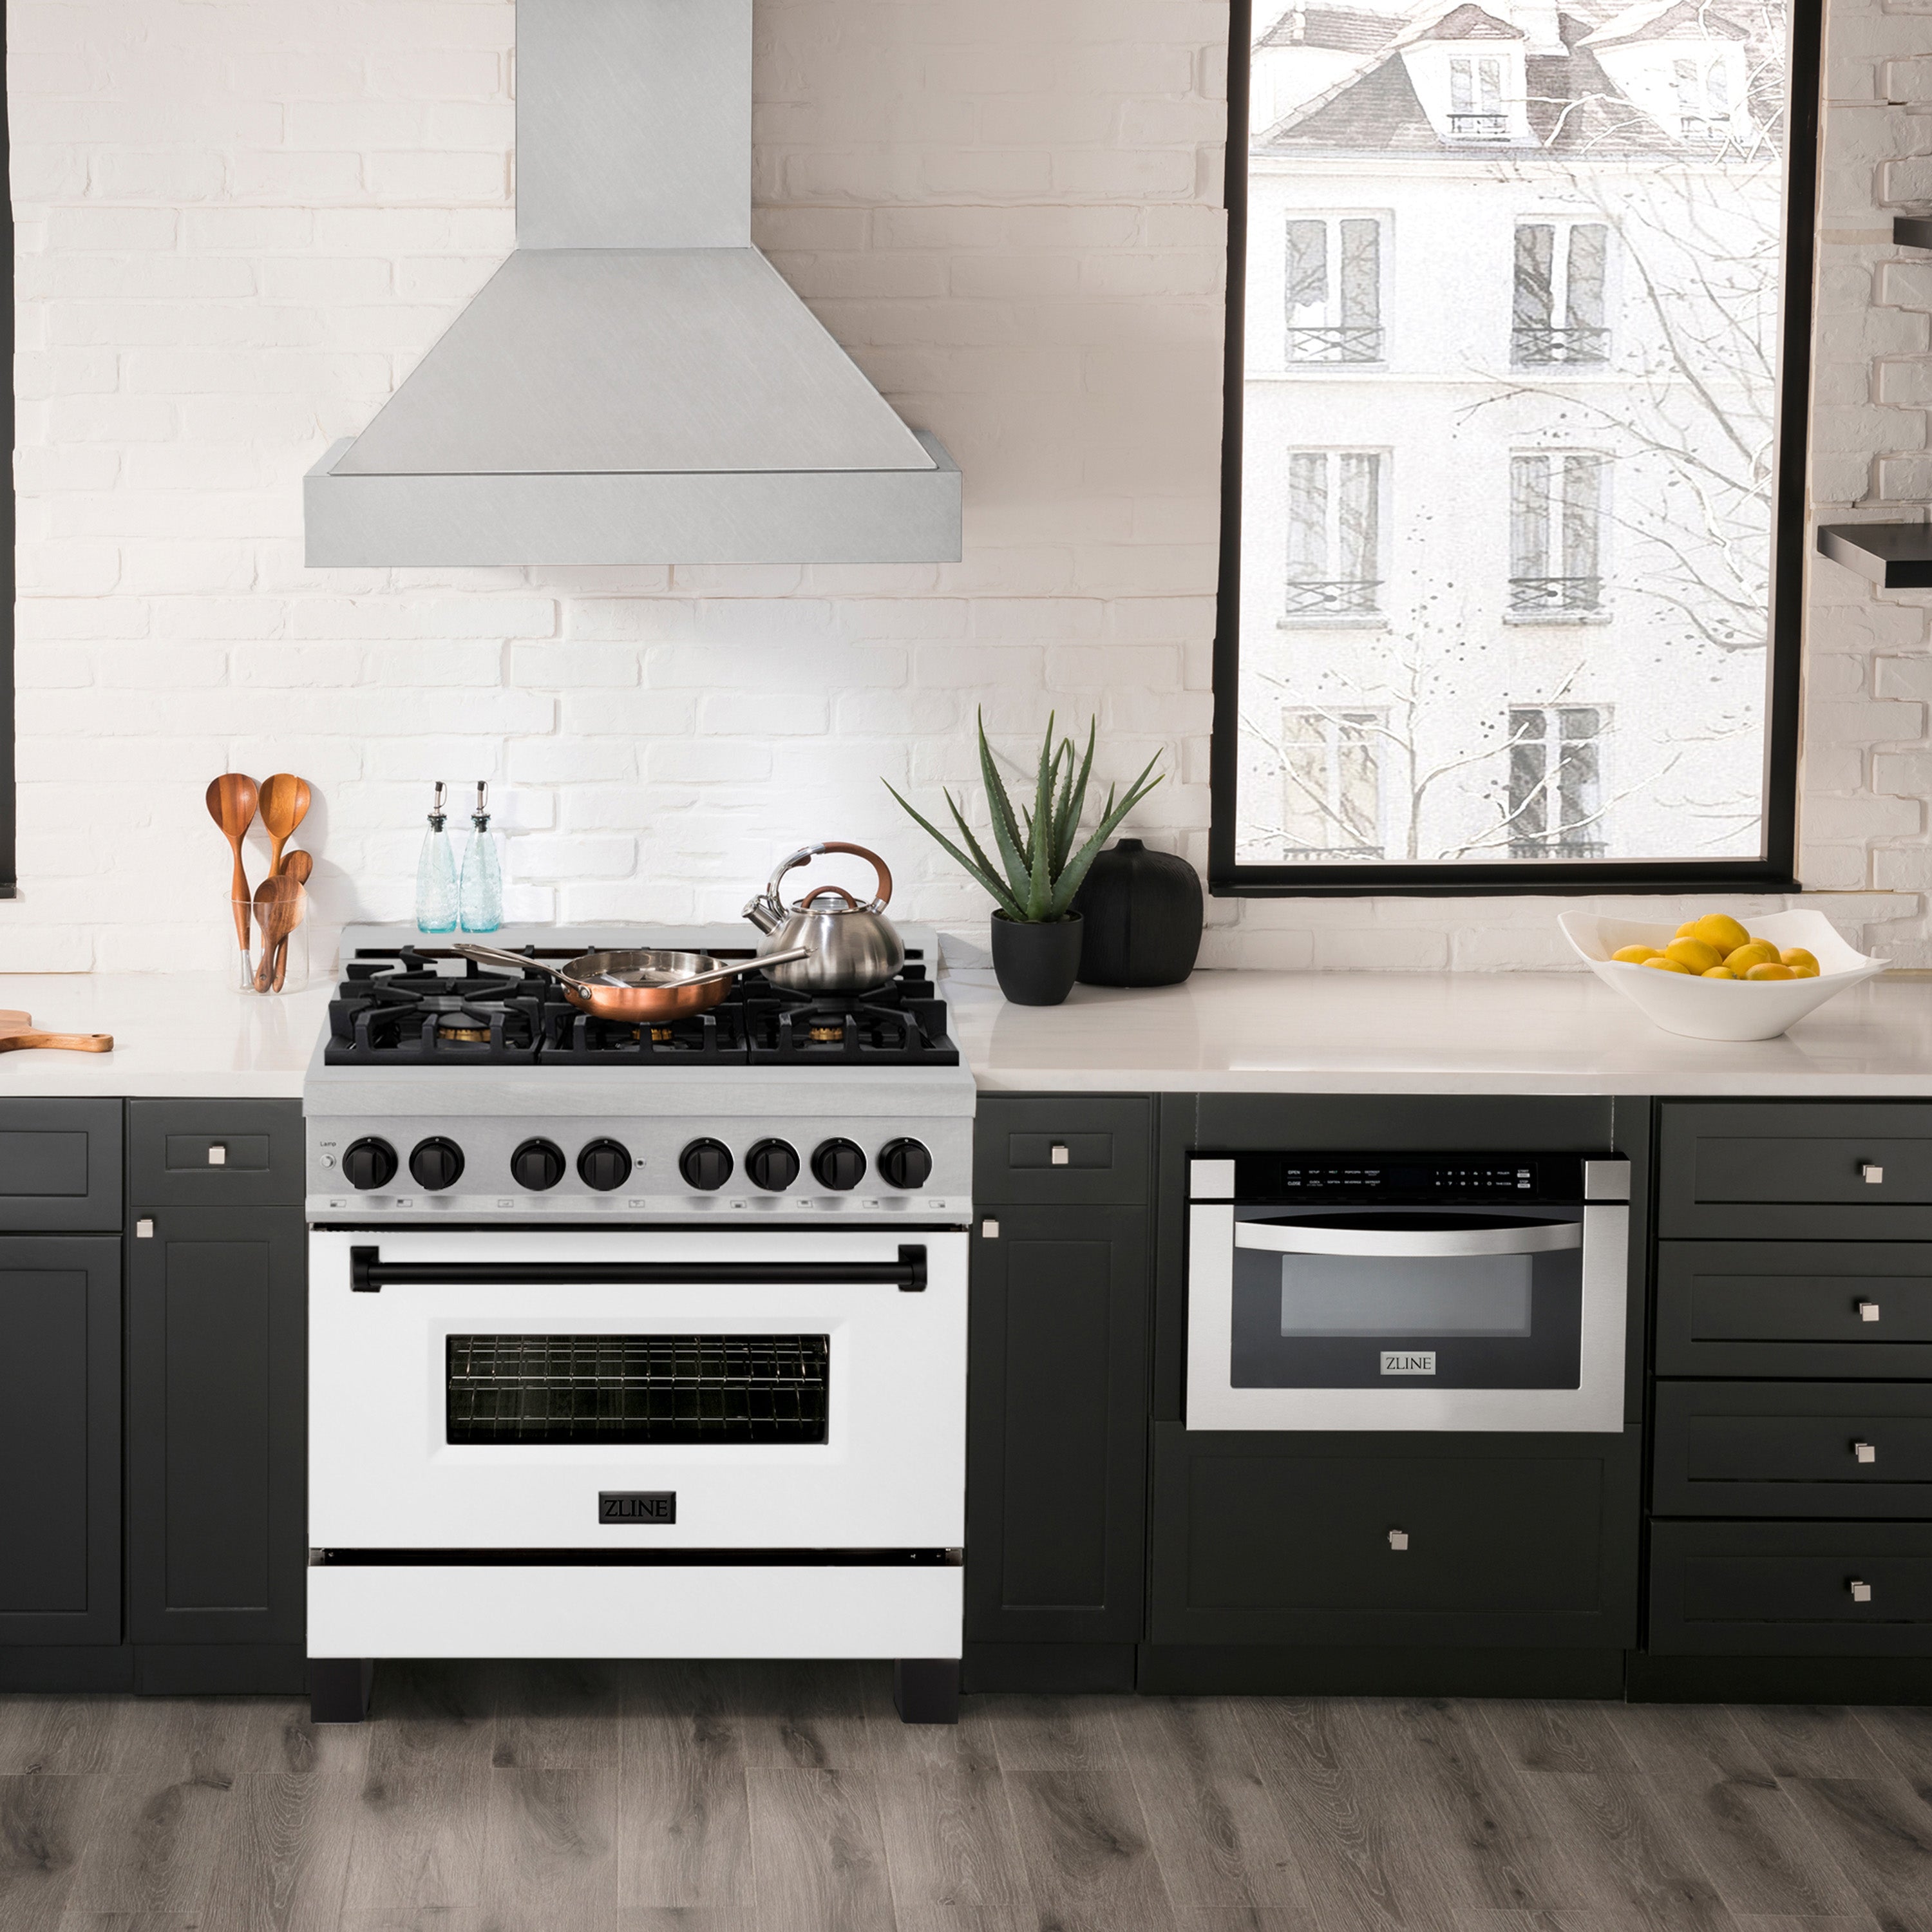 ZLINE Autograph Edition 36" 4.6 cu. ft. Dual Fuel Range with Gas Stove and Electric Oven in DuraSnowð Stainless Steel with White Matte Door and Matte Black Accents (RASZ-WM-36-MB)